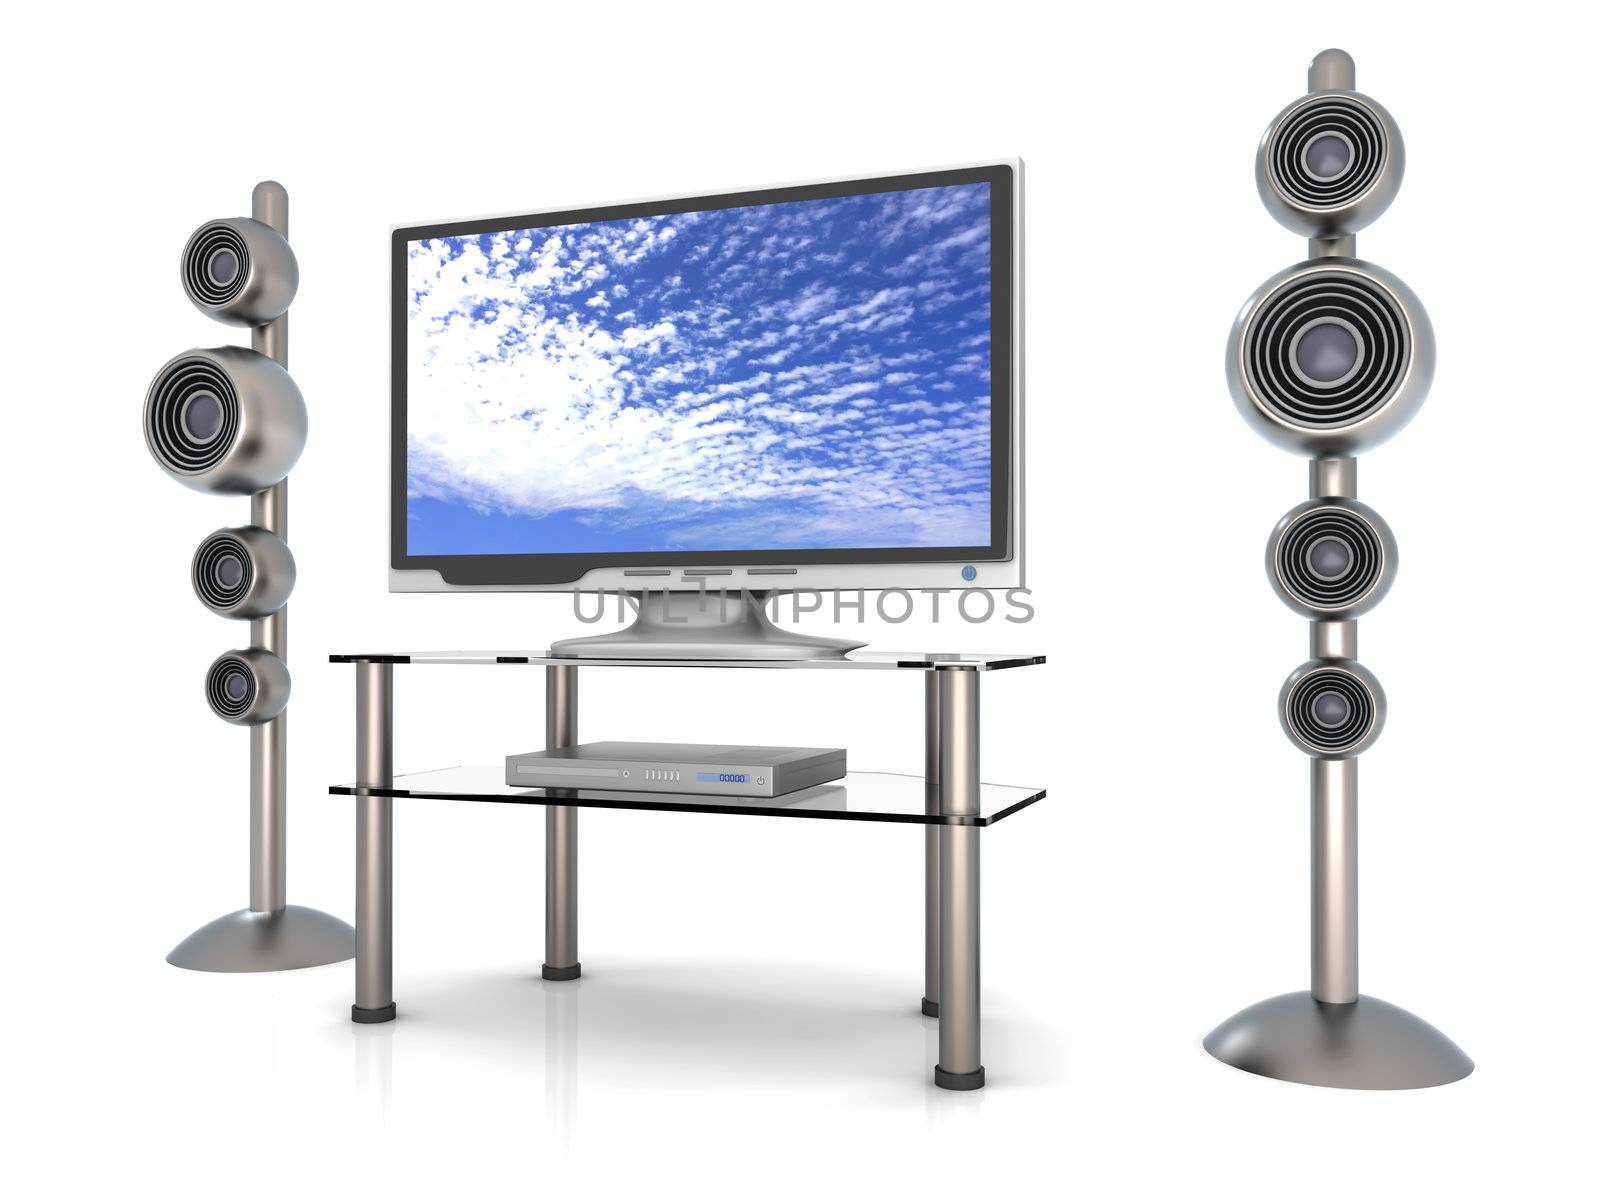 Home Entertainment System	 by Spectral